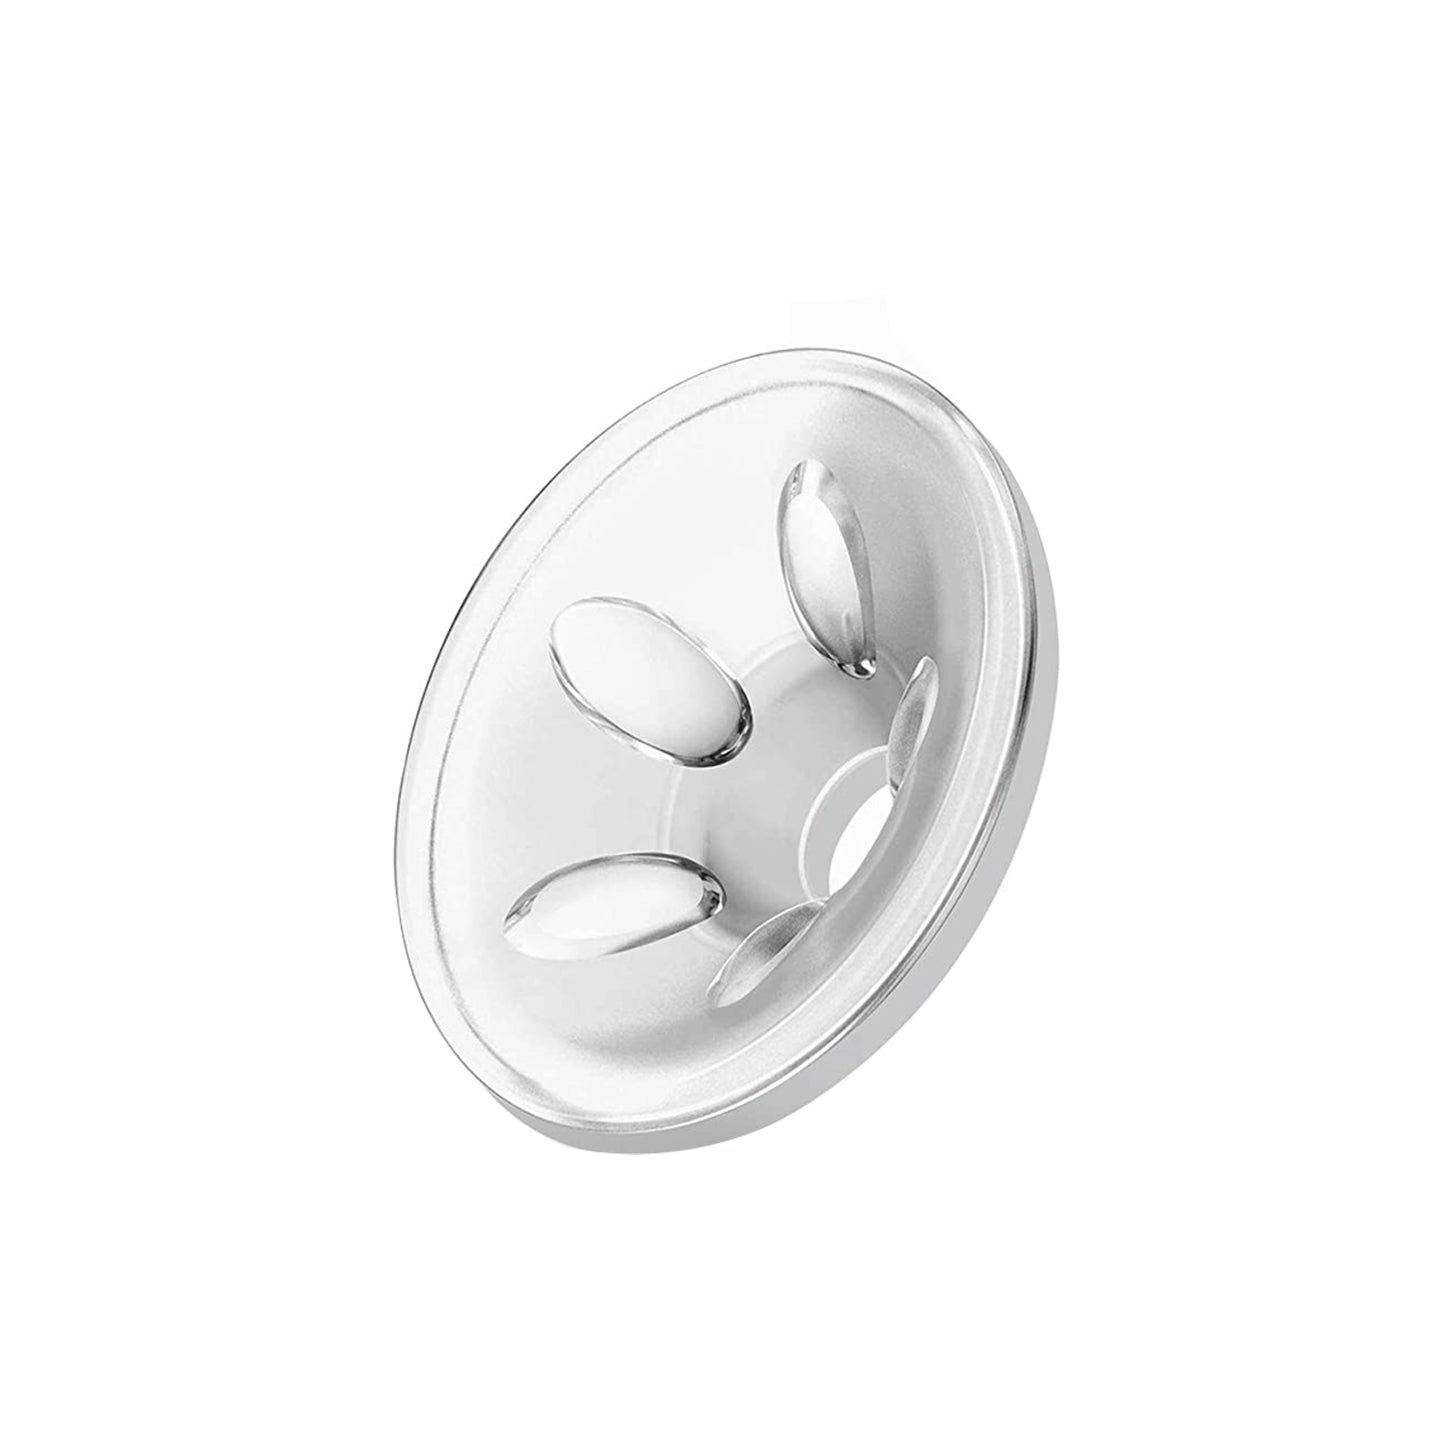 Breast Shield for Electric Breast Pump